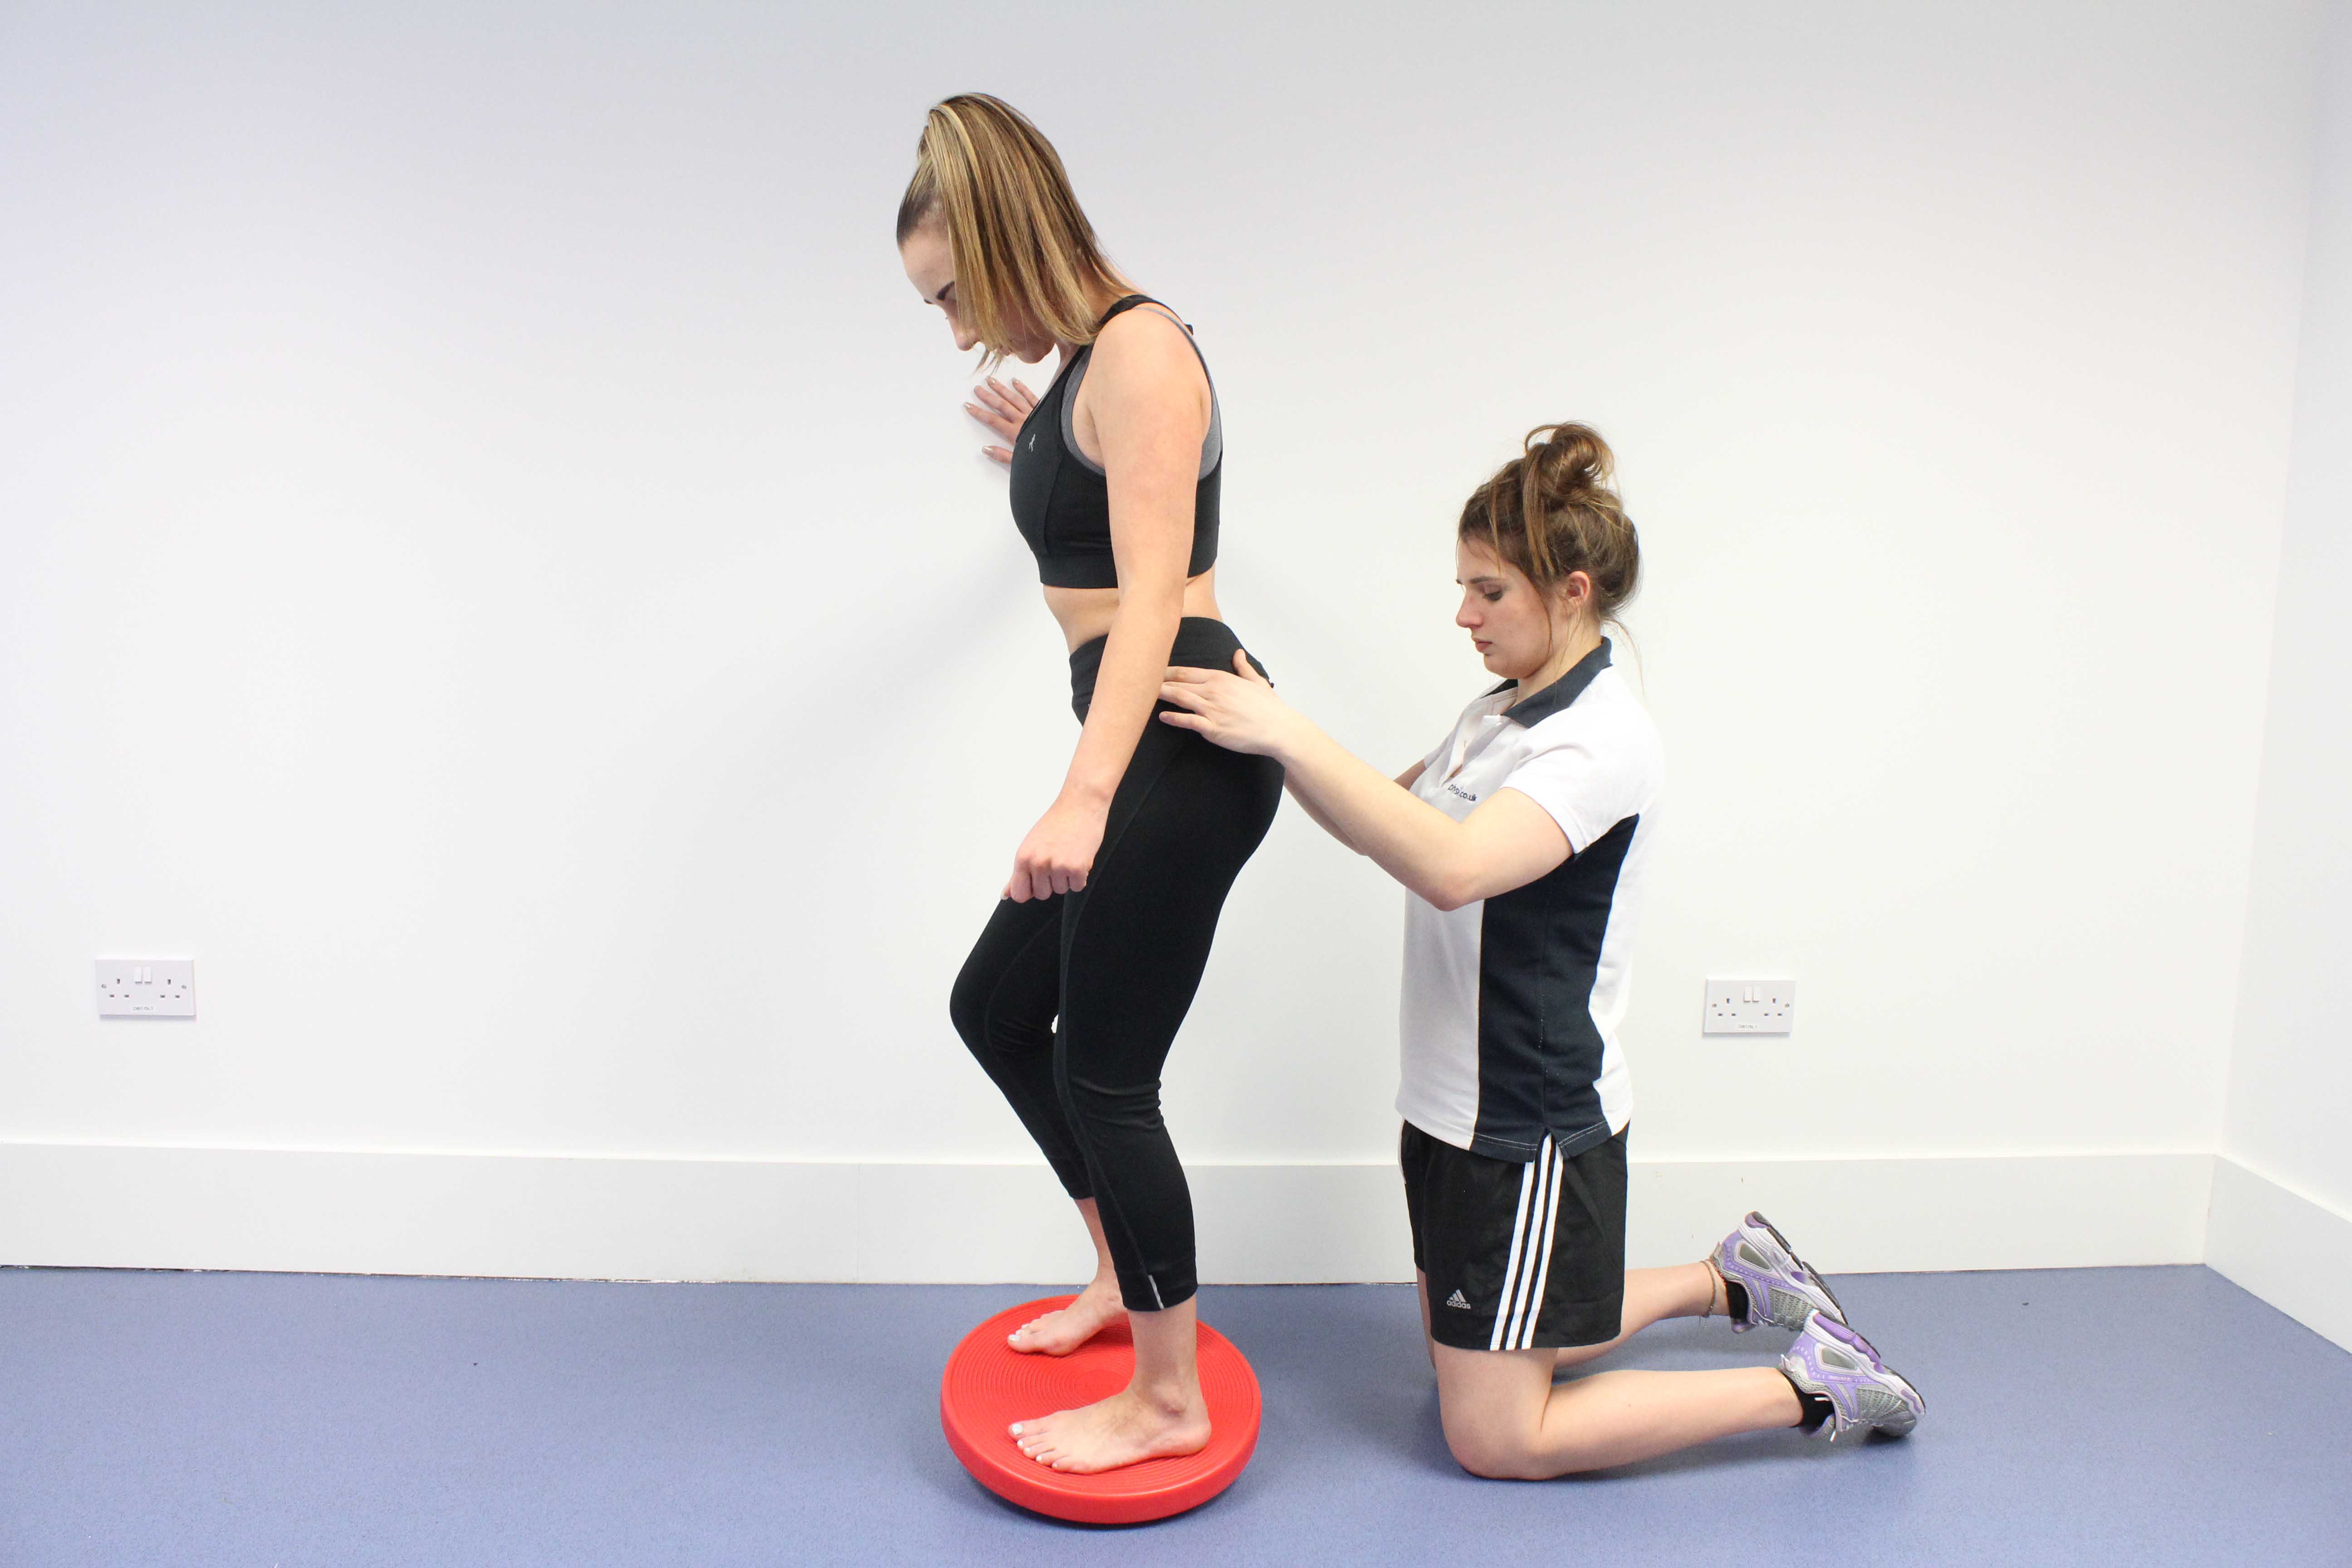 Developing balance and proprioception to prevent future falls